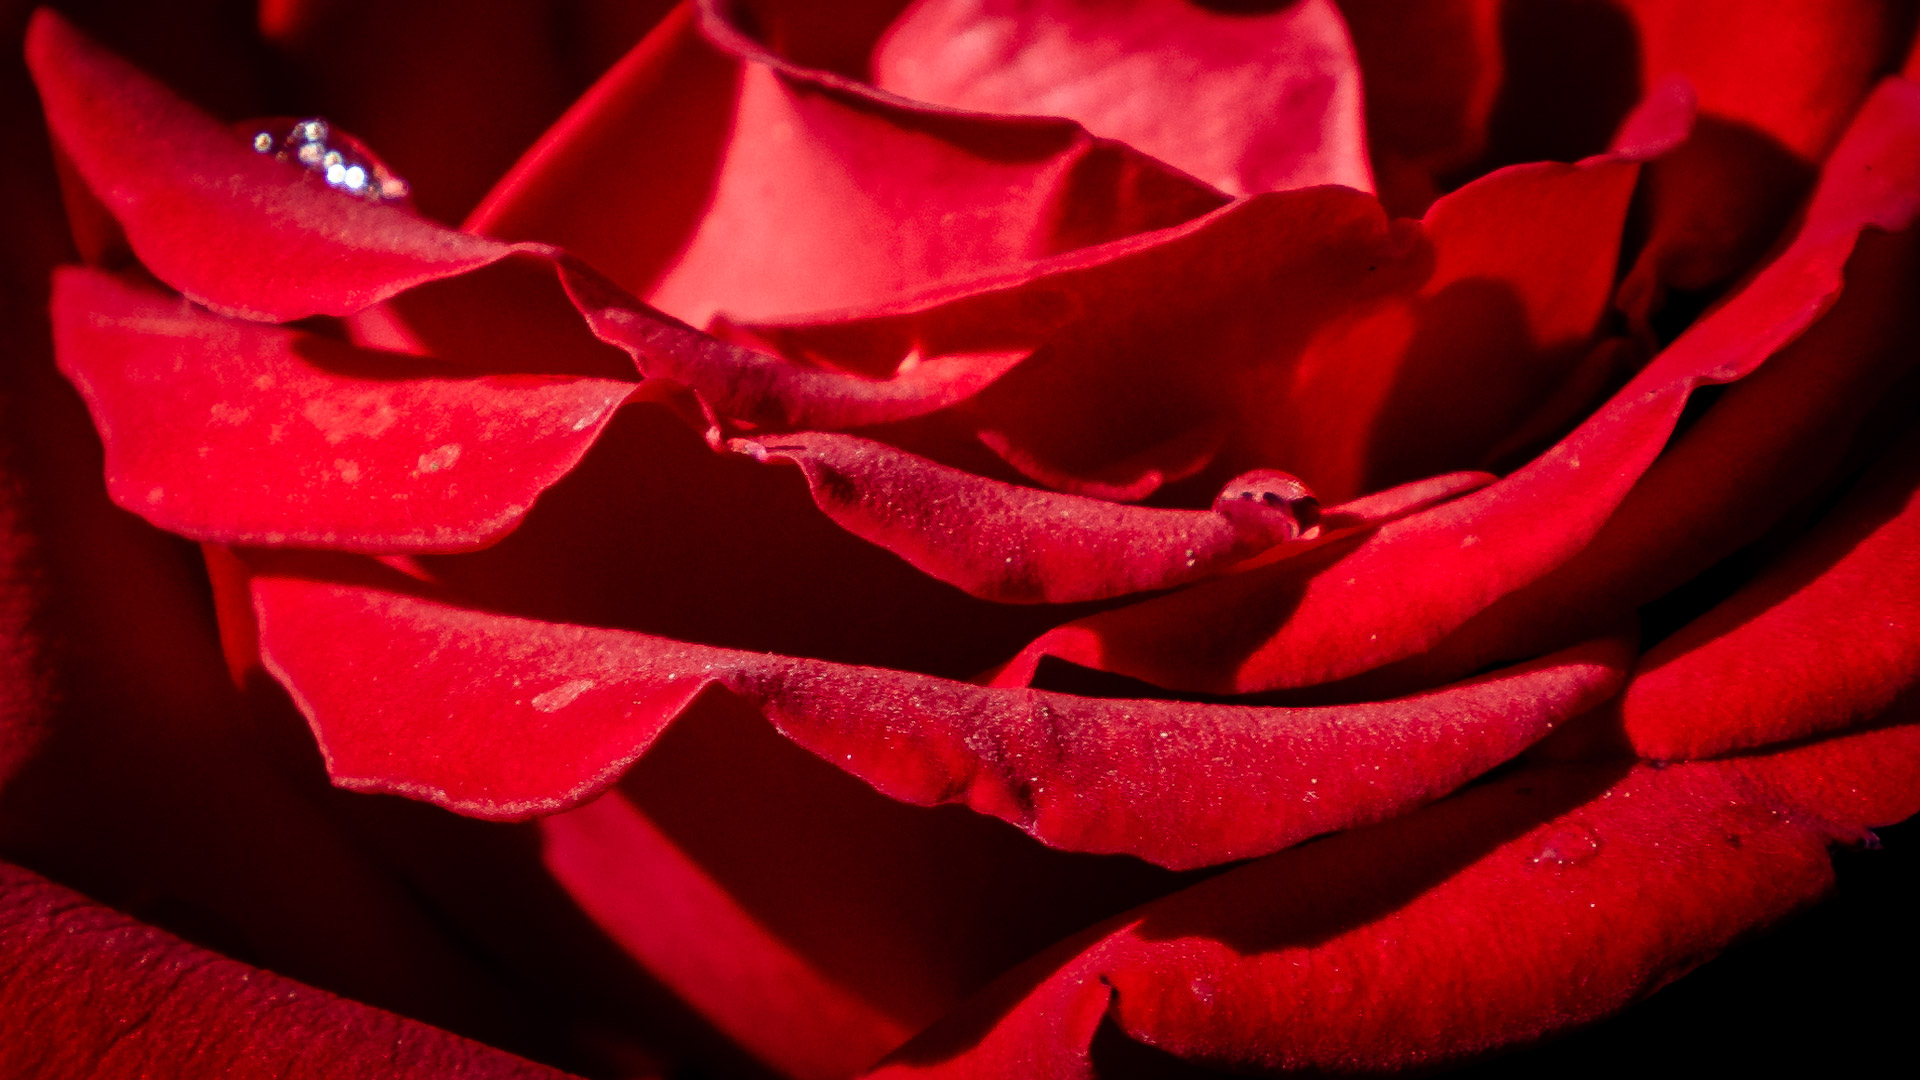 Transform your desktop into a garden of beauty with our red rose flower wallpapers.